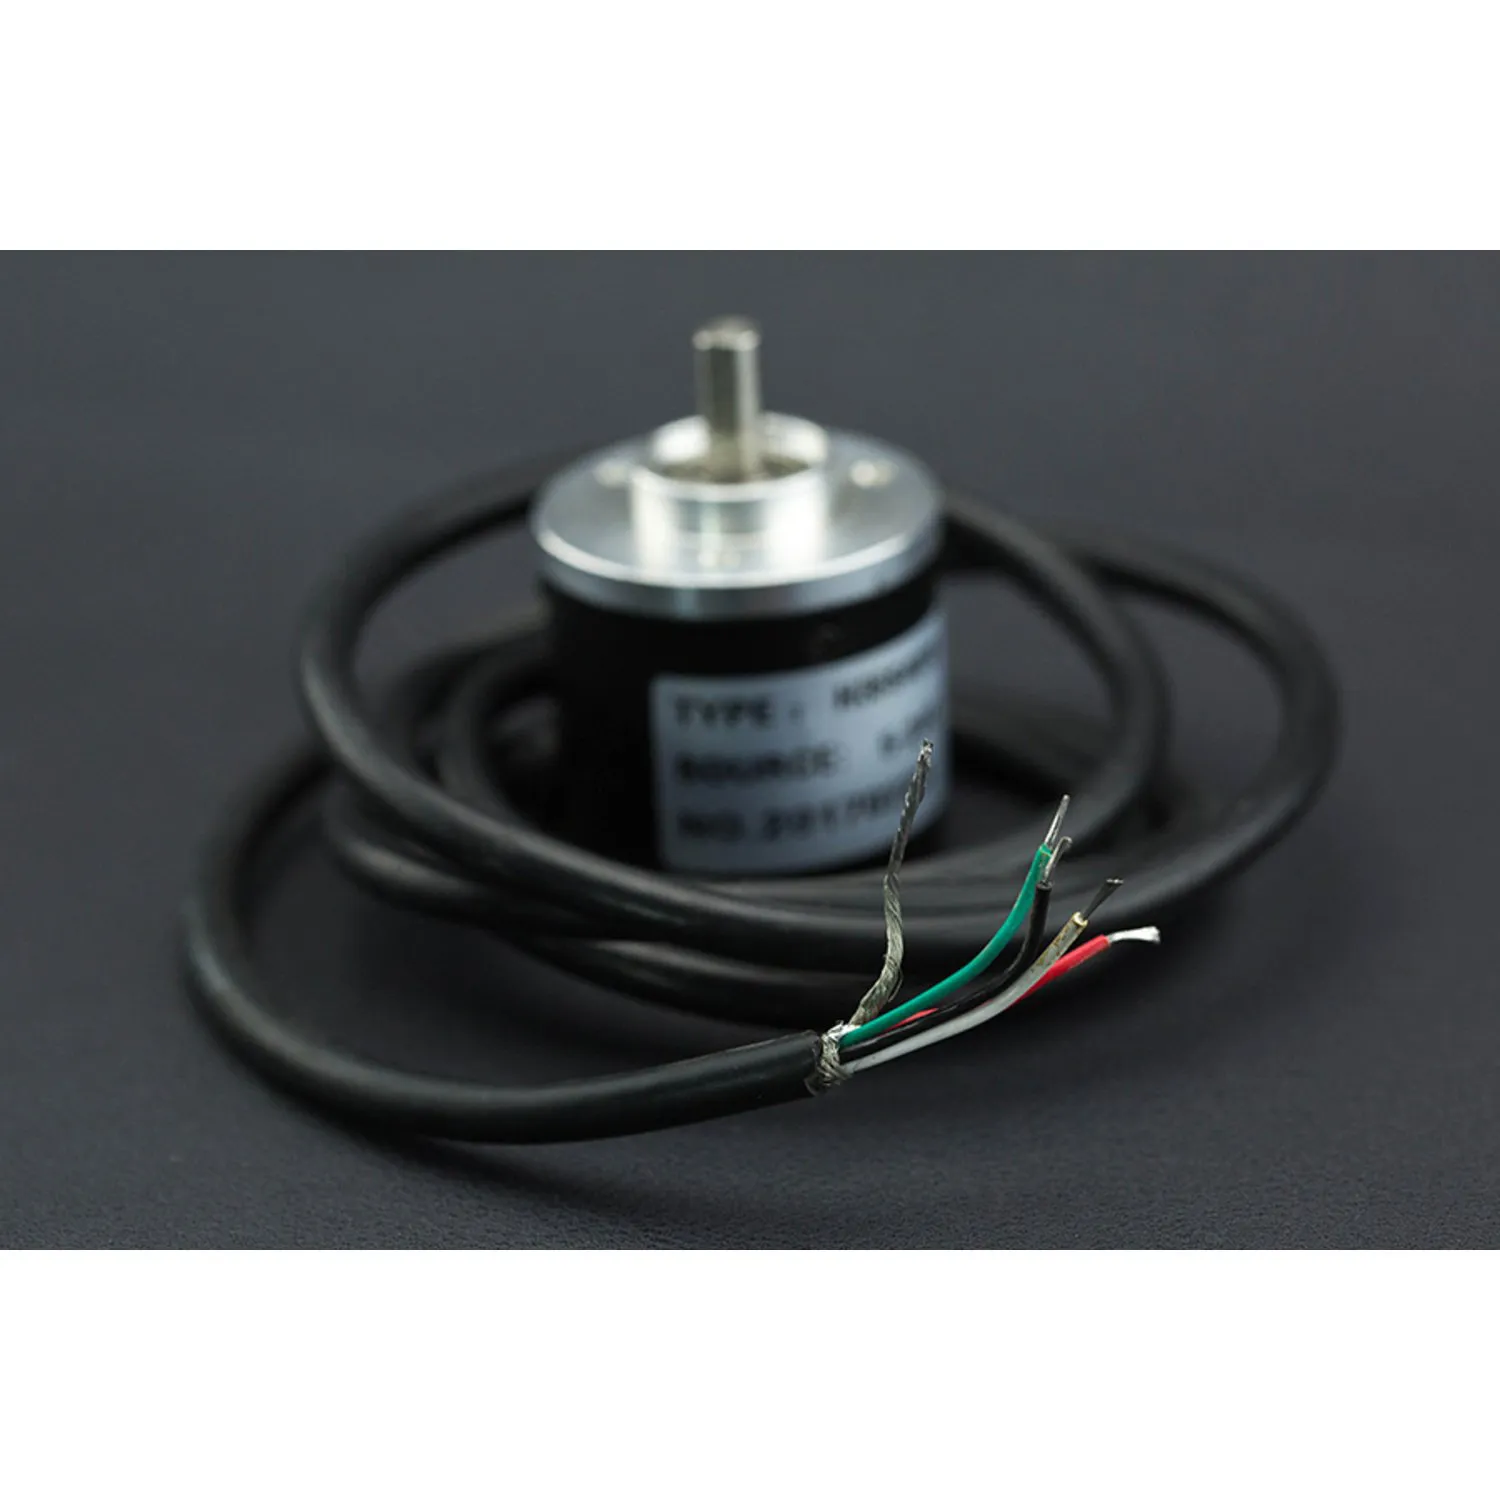 Photo of Incremental Photoelectric Rotary Encoder - 400P/R